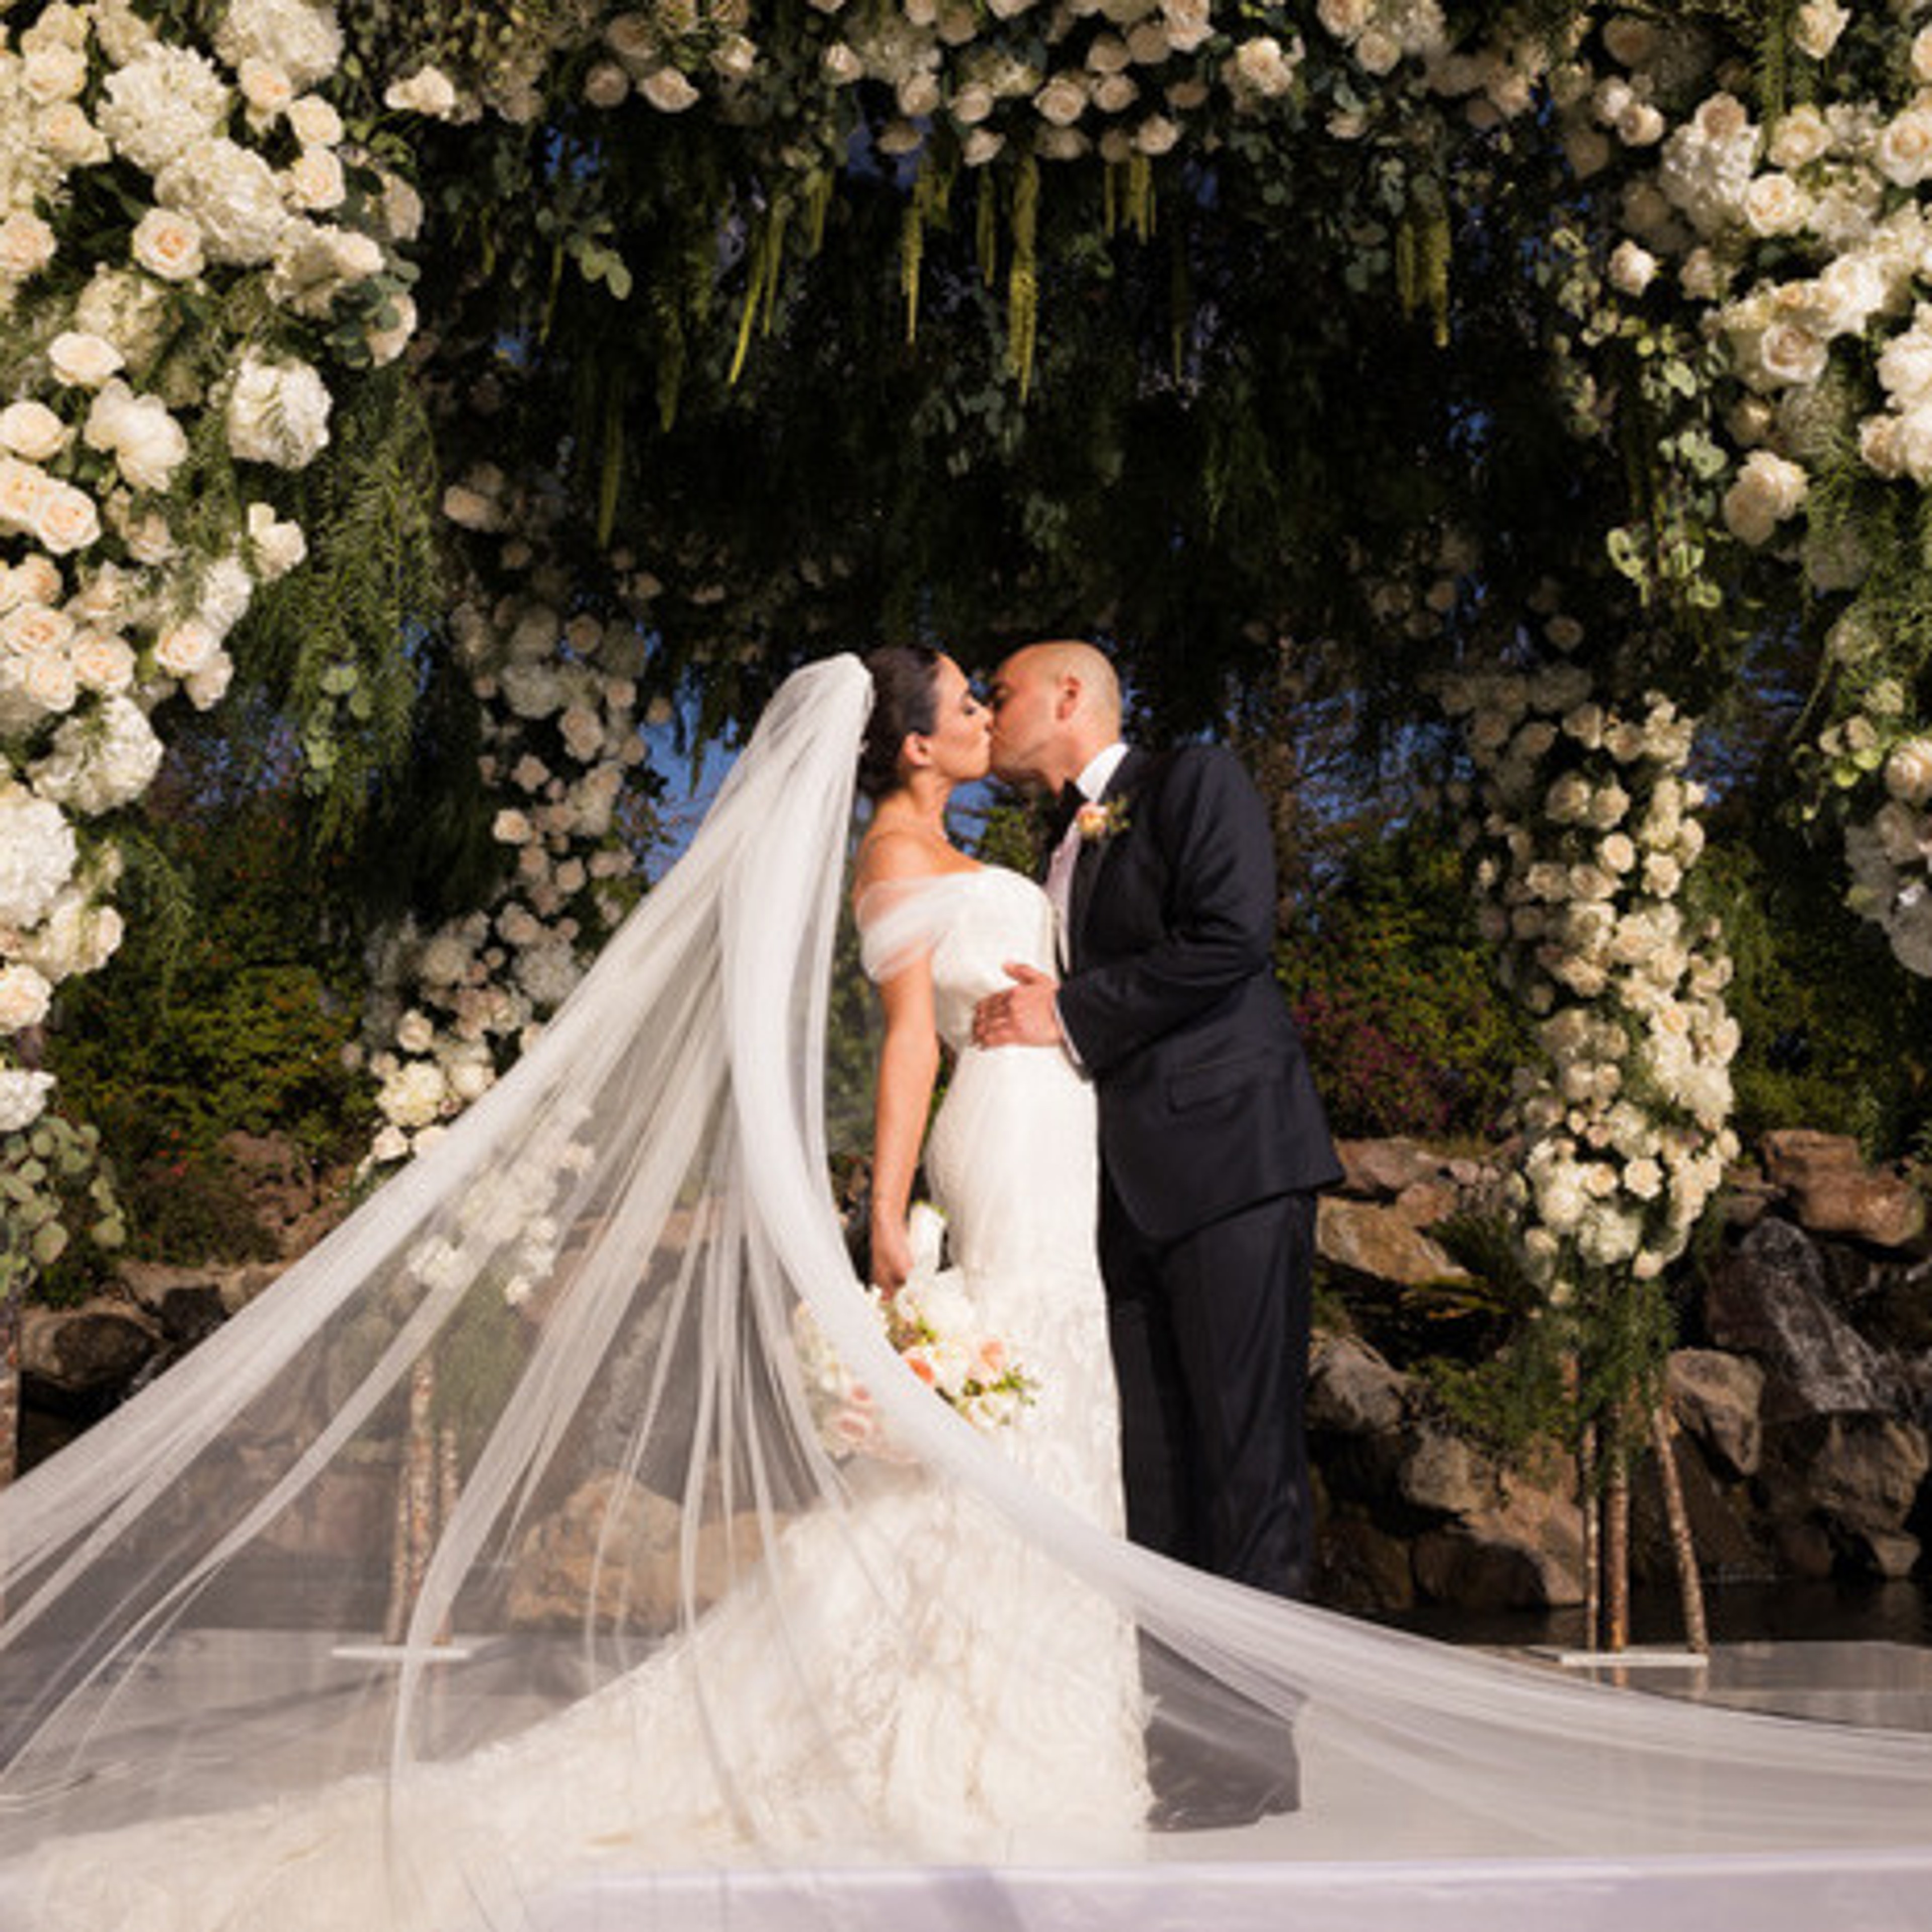 The best wedding photographers in SoCal